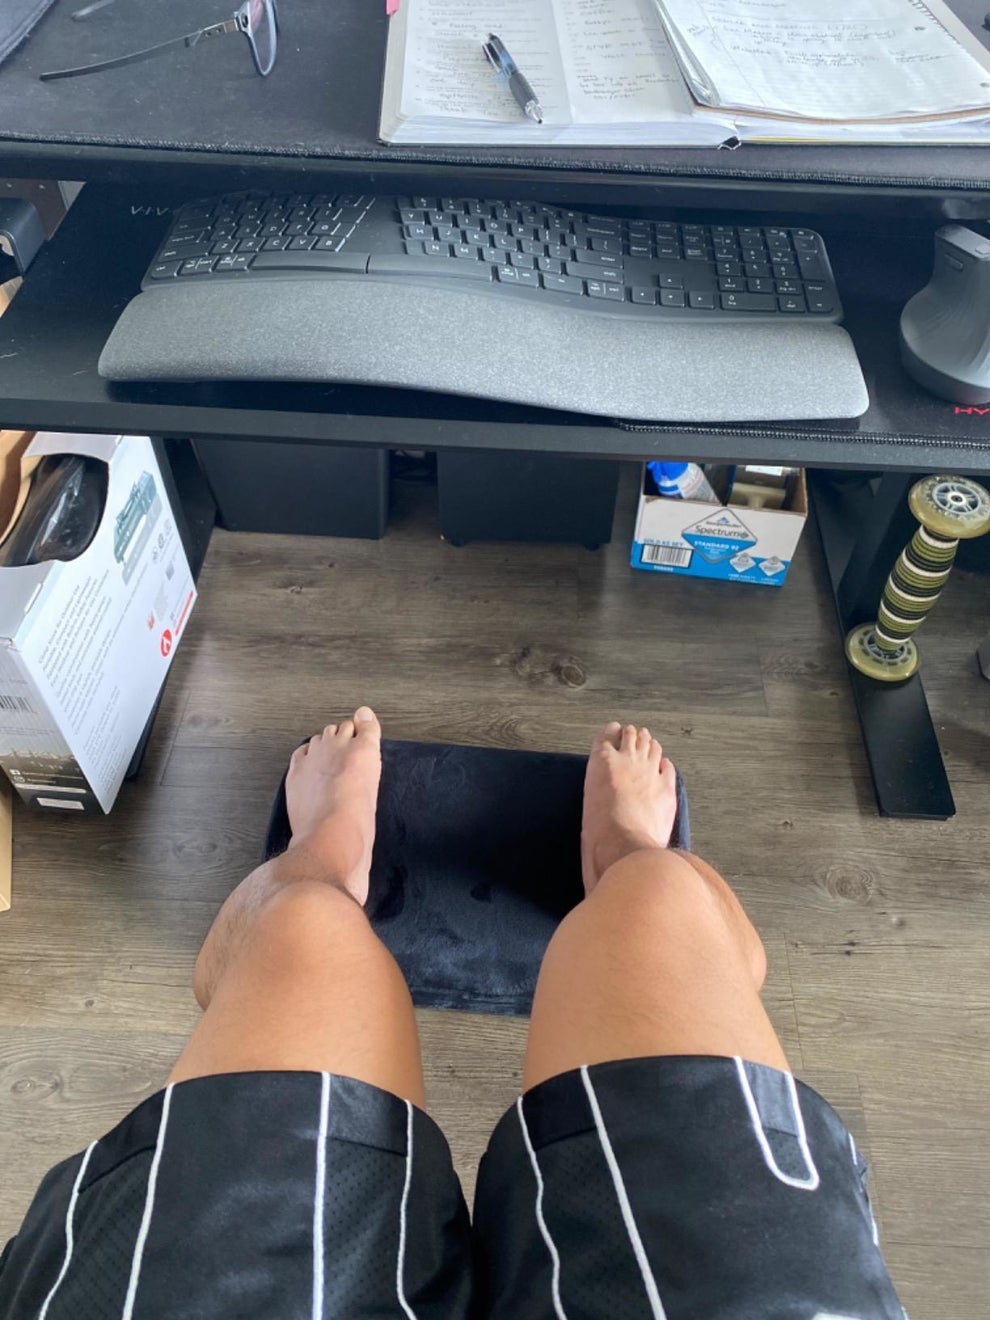 Y'all want to hang out under my desk? : r/Feetishh